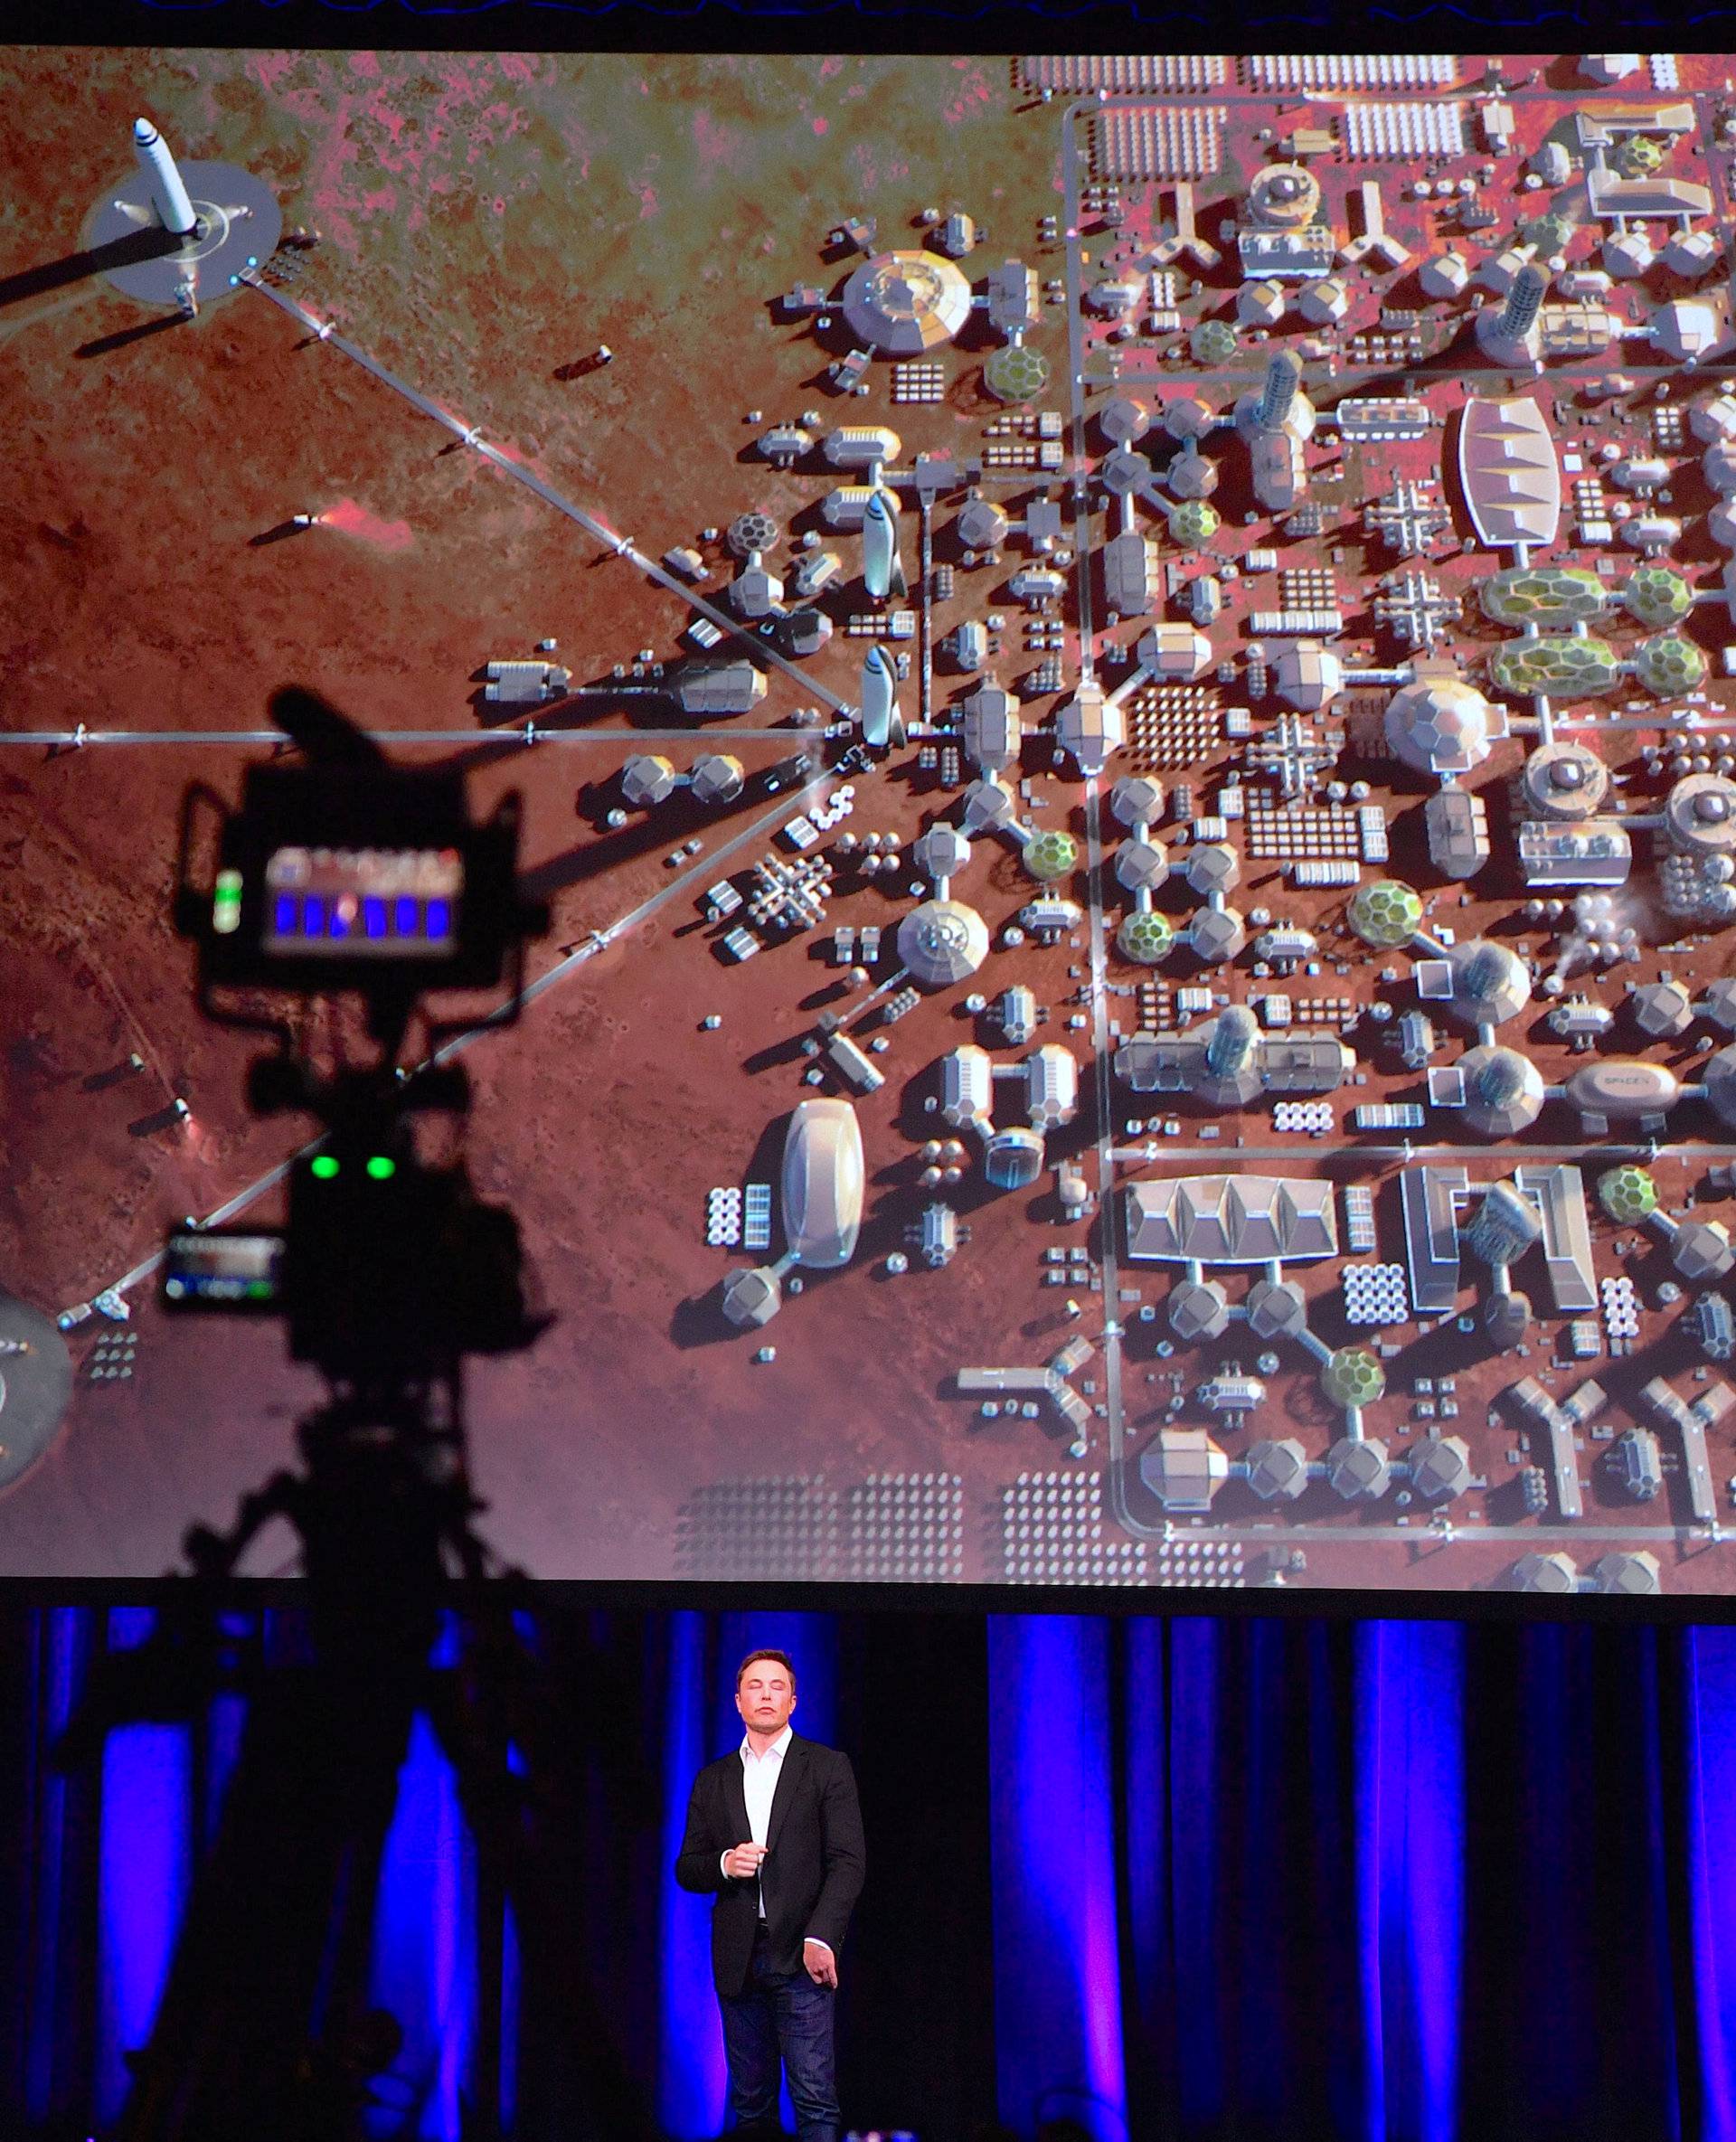 Elon Musk, founder and Chief Executive Officer and lead designer of SpaceX, reacts as a screen displays a depiction of a human colony on the planet Mars during a presentation at the International Astronautical Congress in Adelaide